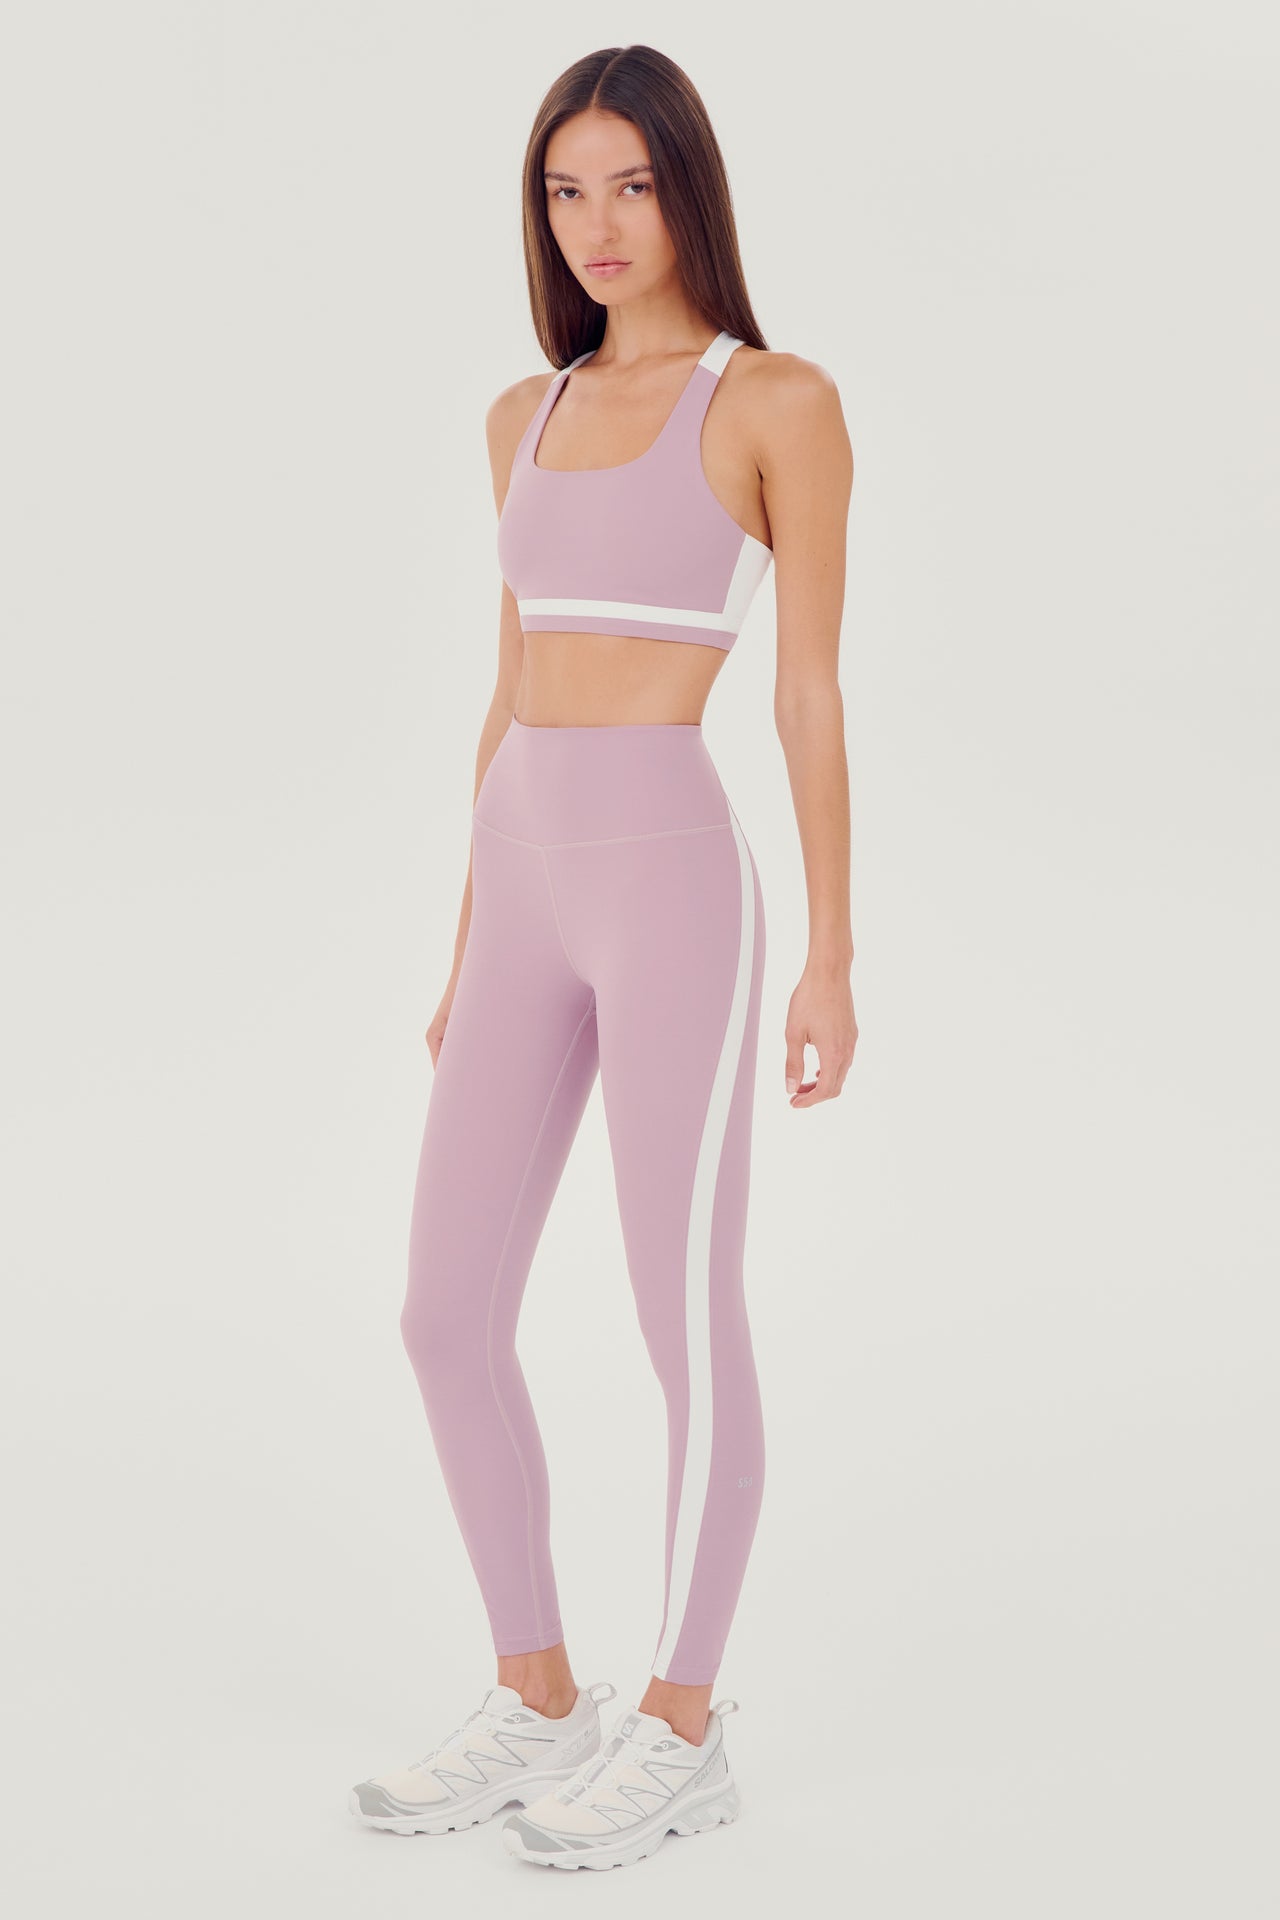 A woman wearing a SPLITS59 Miles Rigor Bra in Blush/White and leggings designed for style and support during workouts.